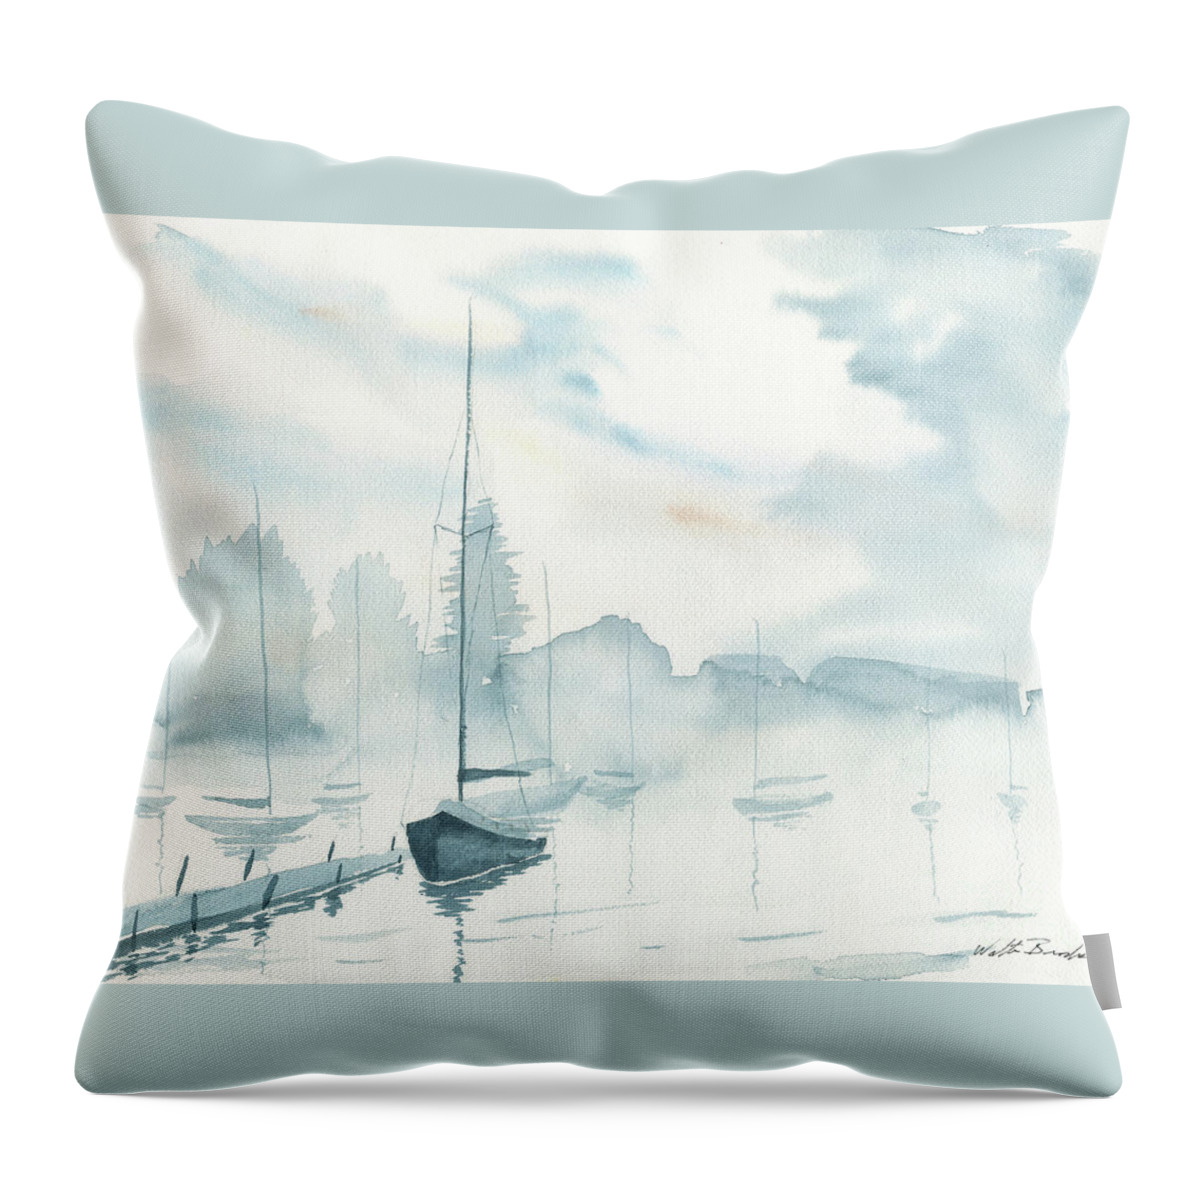 Sailboats Throw Pillow featuring the painting Misty Sailboats by Walt Brodis